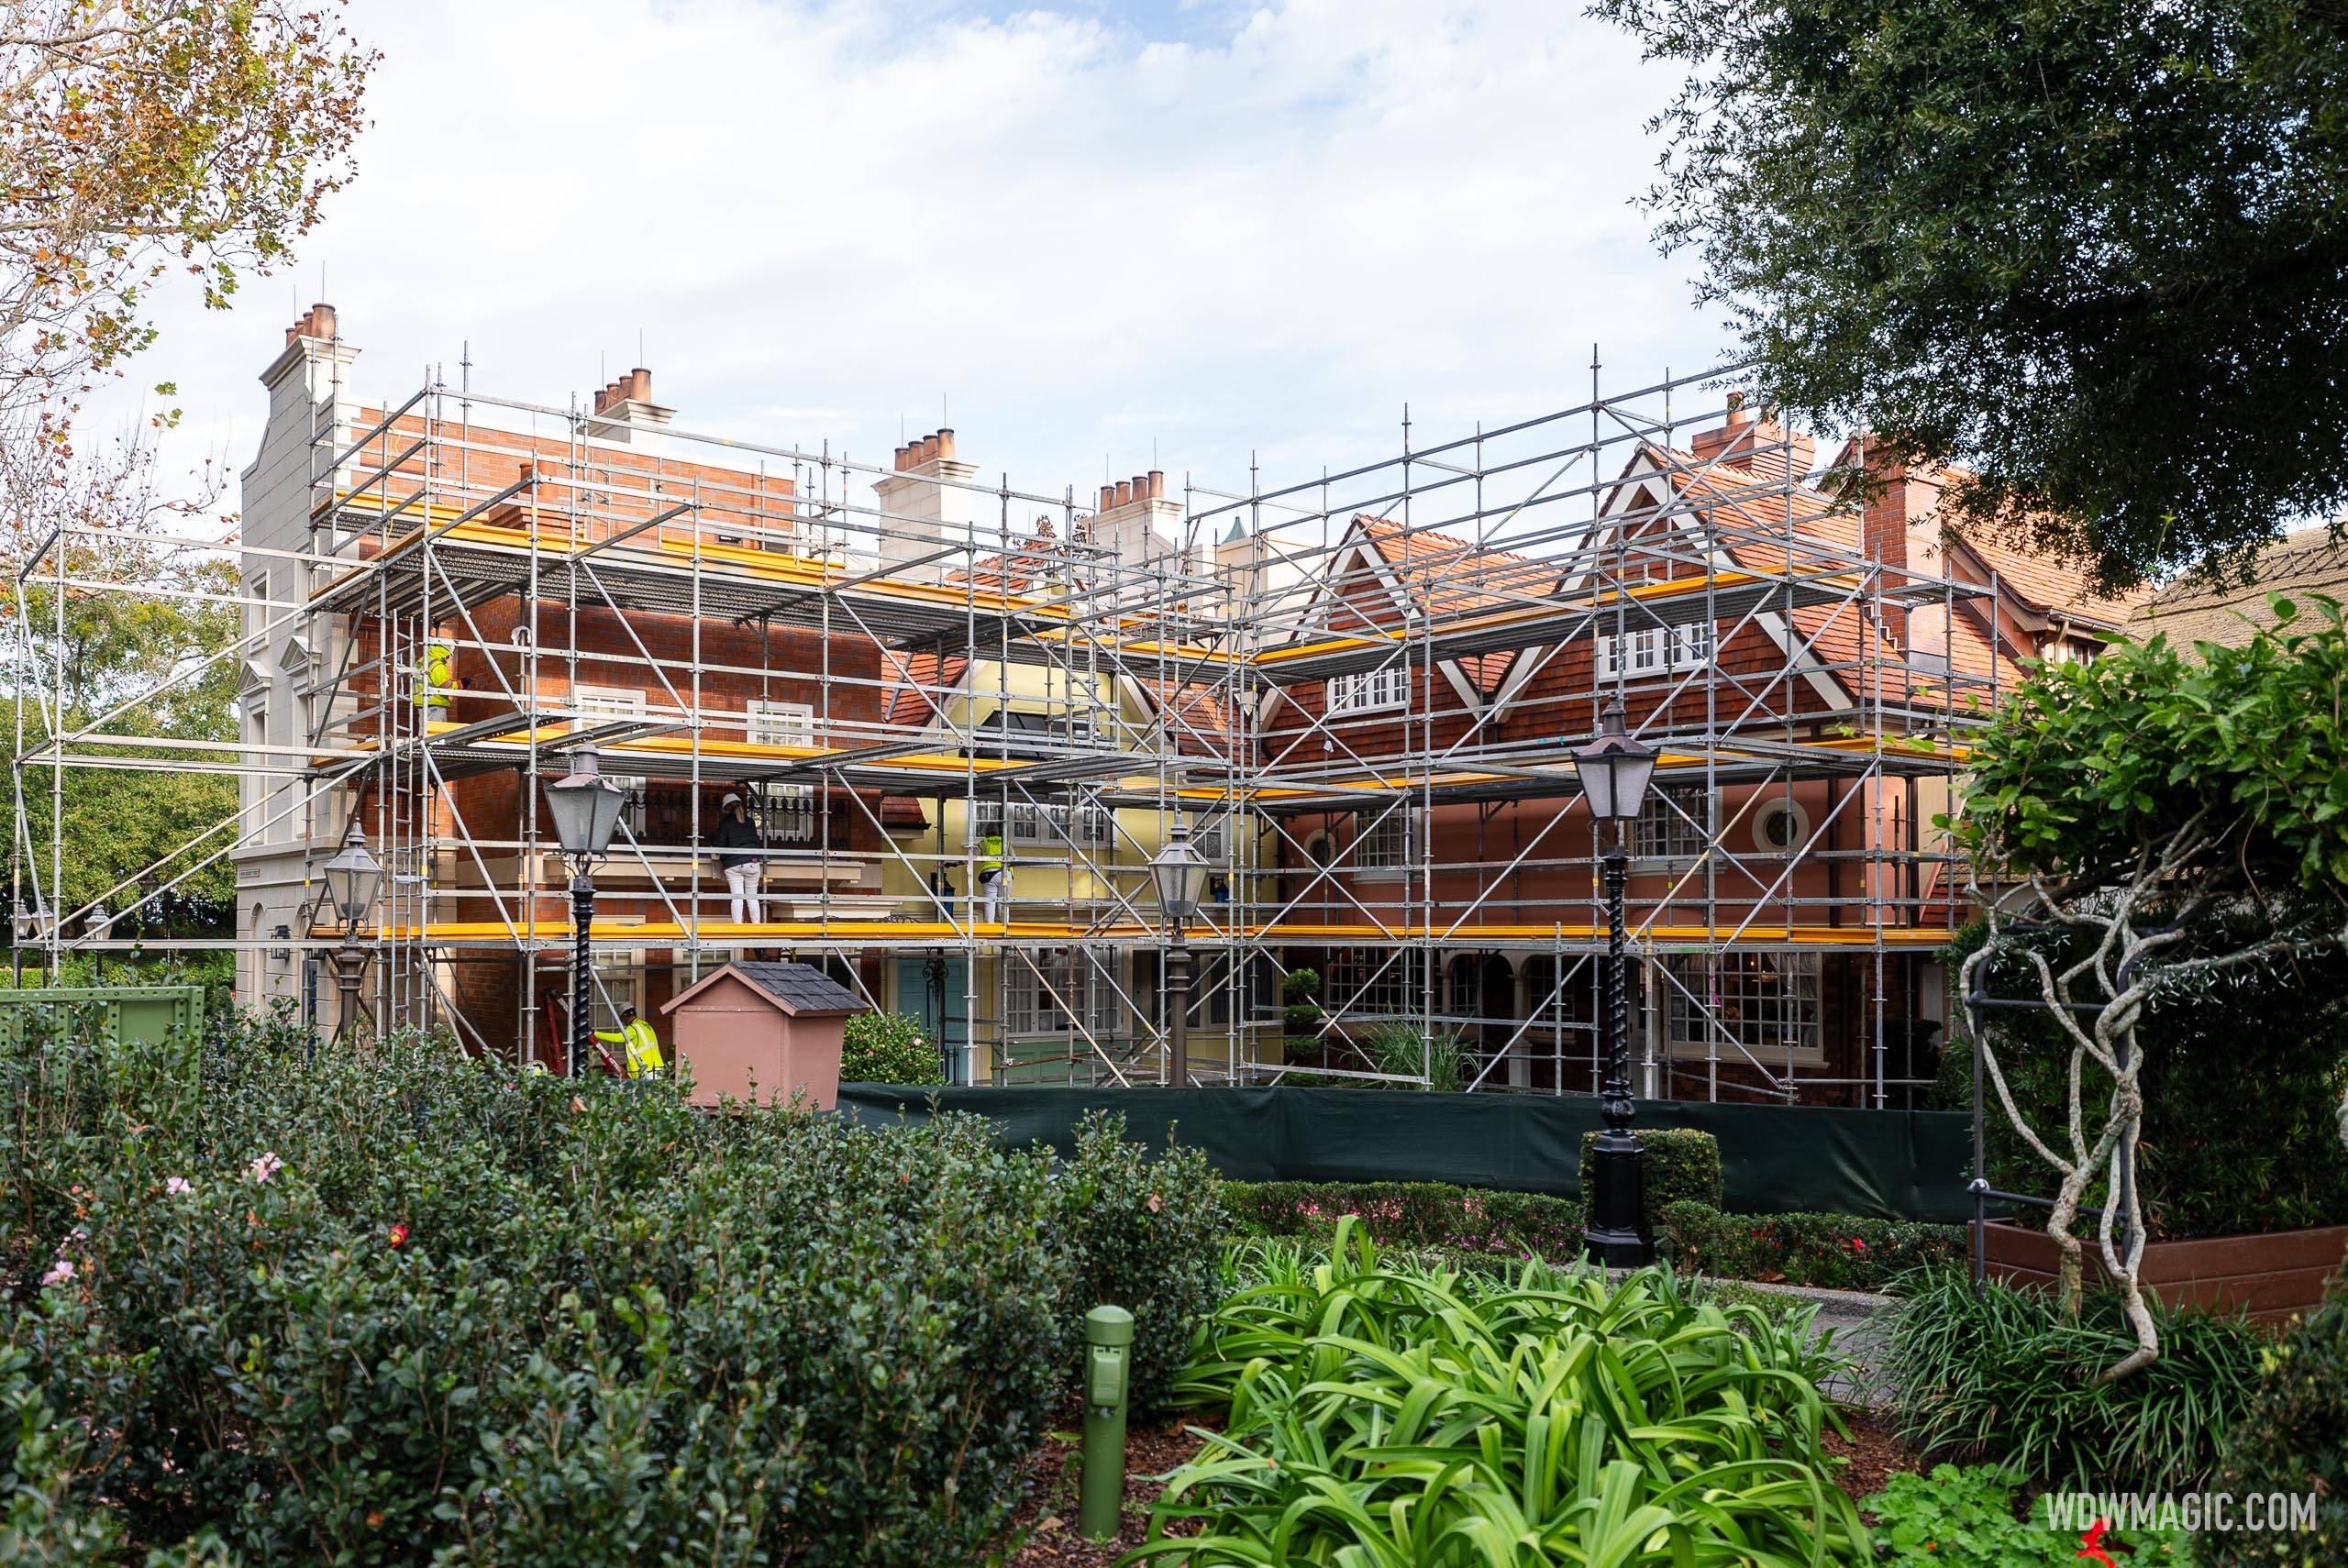 Scaffolding up at EPCOT's United Kingdom pavilion as refurbishment work continues